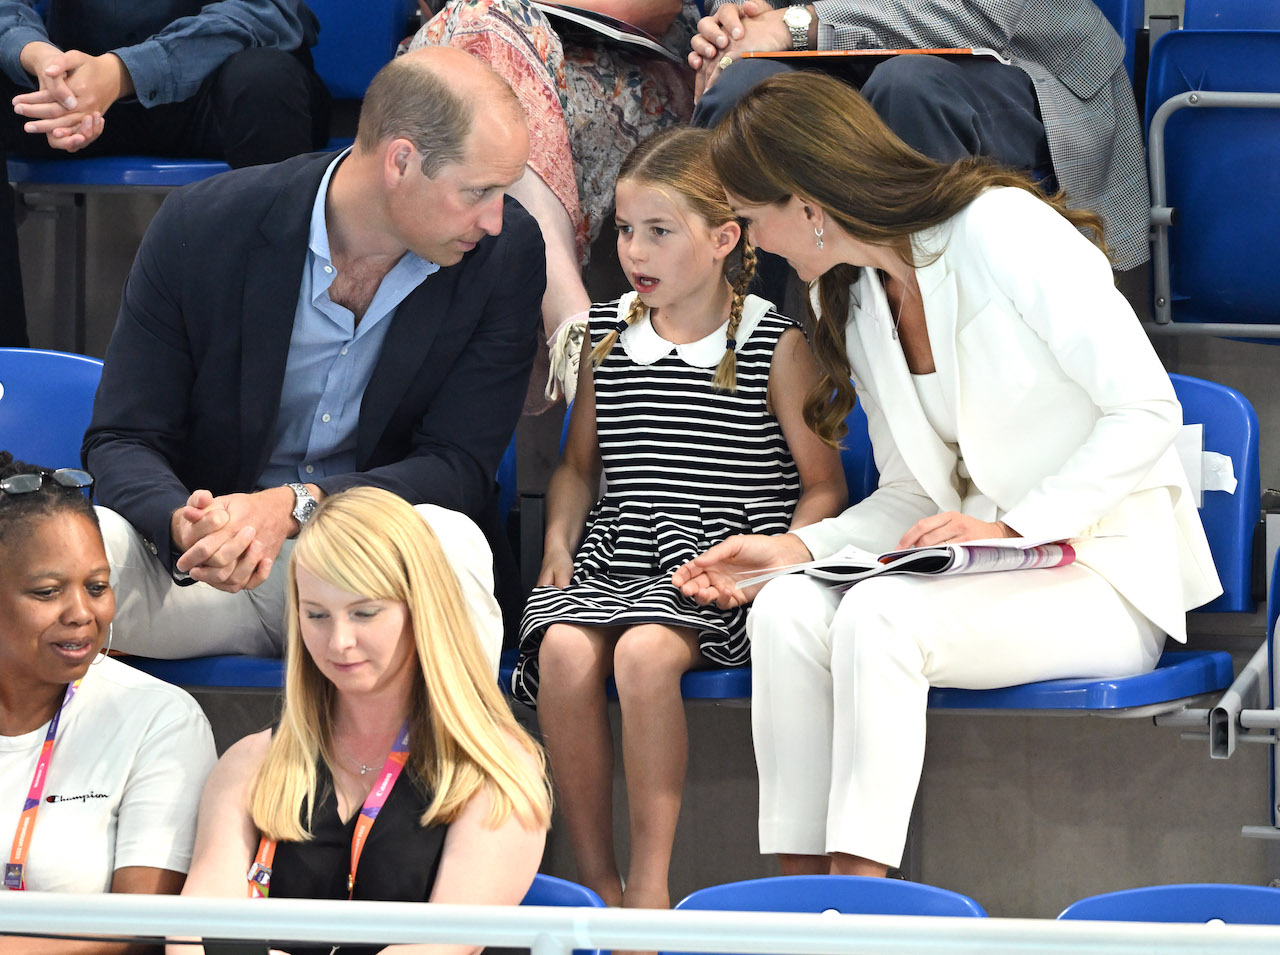 Prince William, Princess Charlotte, and Kate Middleton attend the Sandwell Aquatics Centre during the 2022 Commonwealth Games